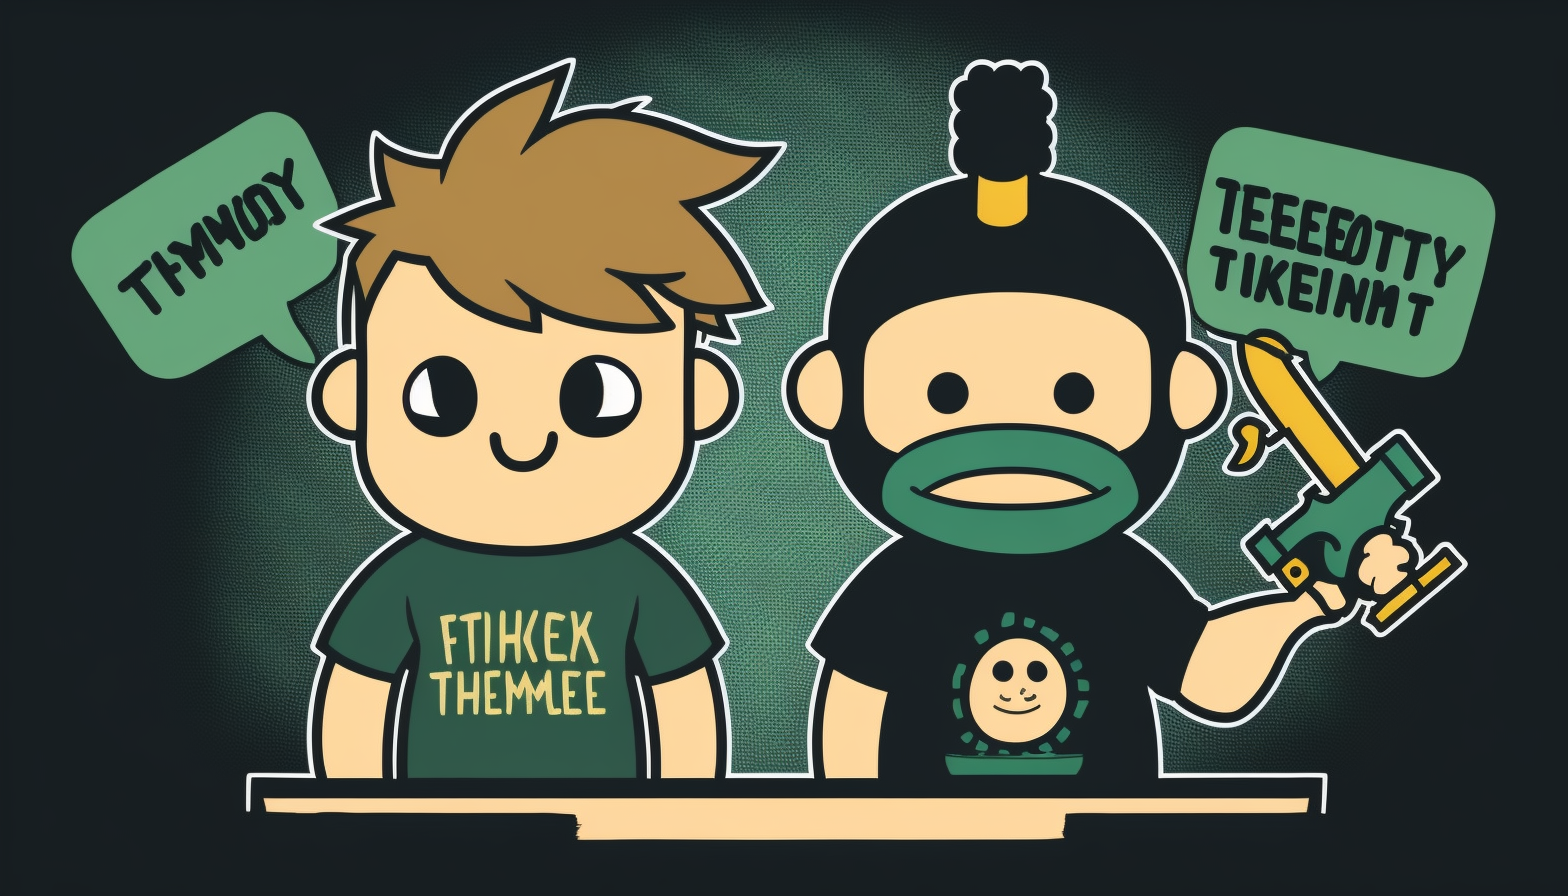 An animated image featuring two characters, one wearing a HackTheBox Academy shirt and the other wearing a TryHackMe shirt, each with a thought bubble above their head containing a relevant symbol for their platform and both characters standing on a see-saw that is balanced in the middle.